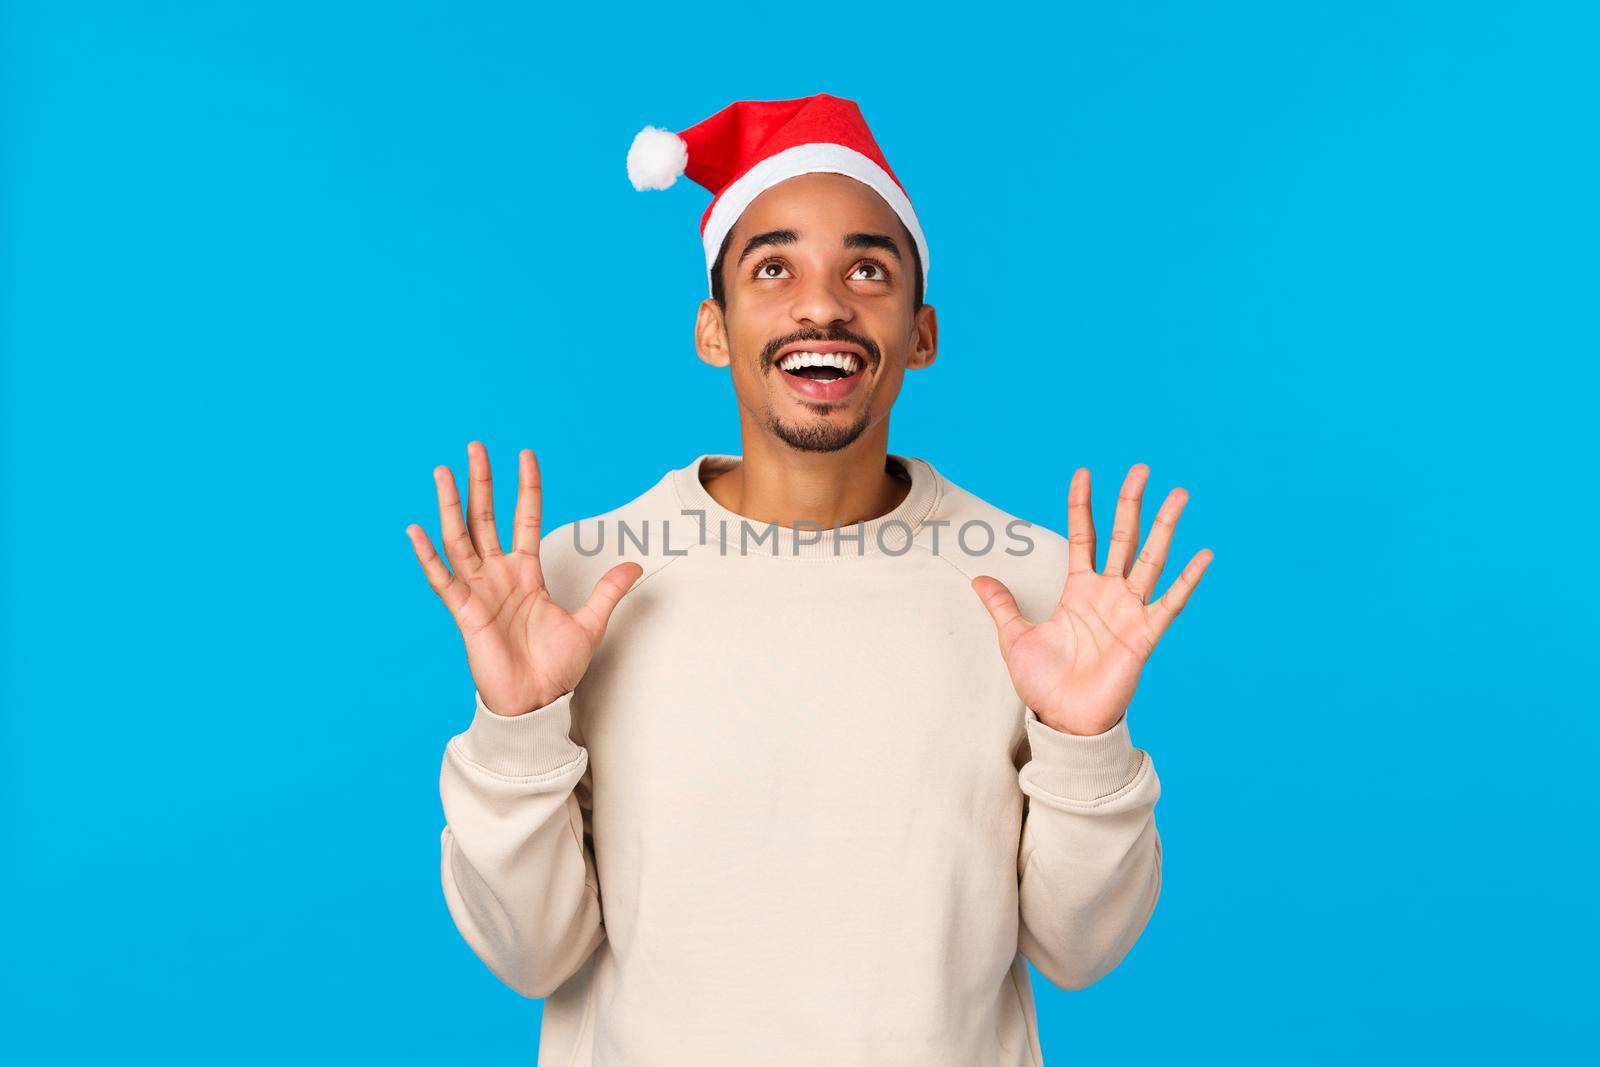 Celebration, christmas mood and happiness concept. Cheerful and happy african-american young man having fun, wearing santa hat and winter sweater, catching gifts from upwards, smiling look up.